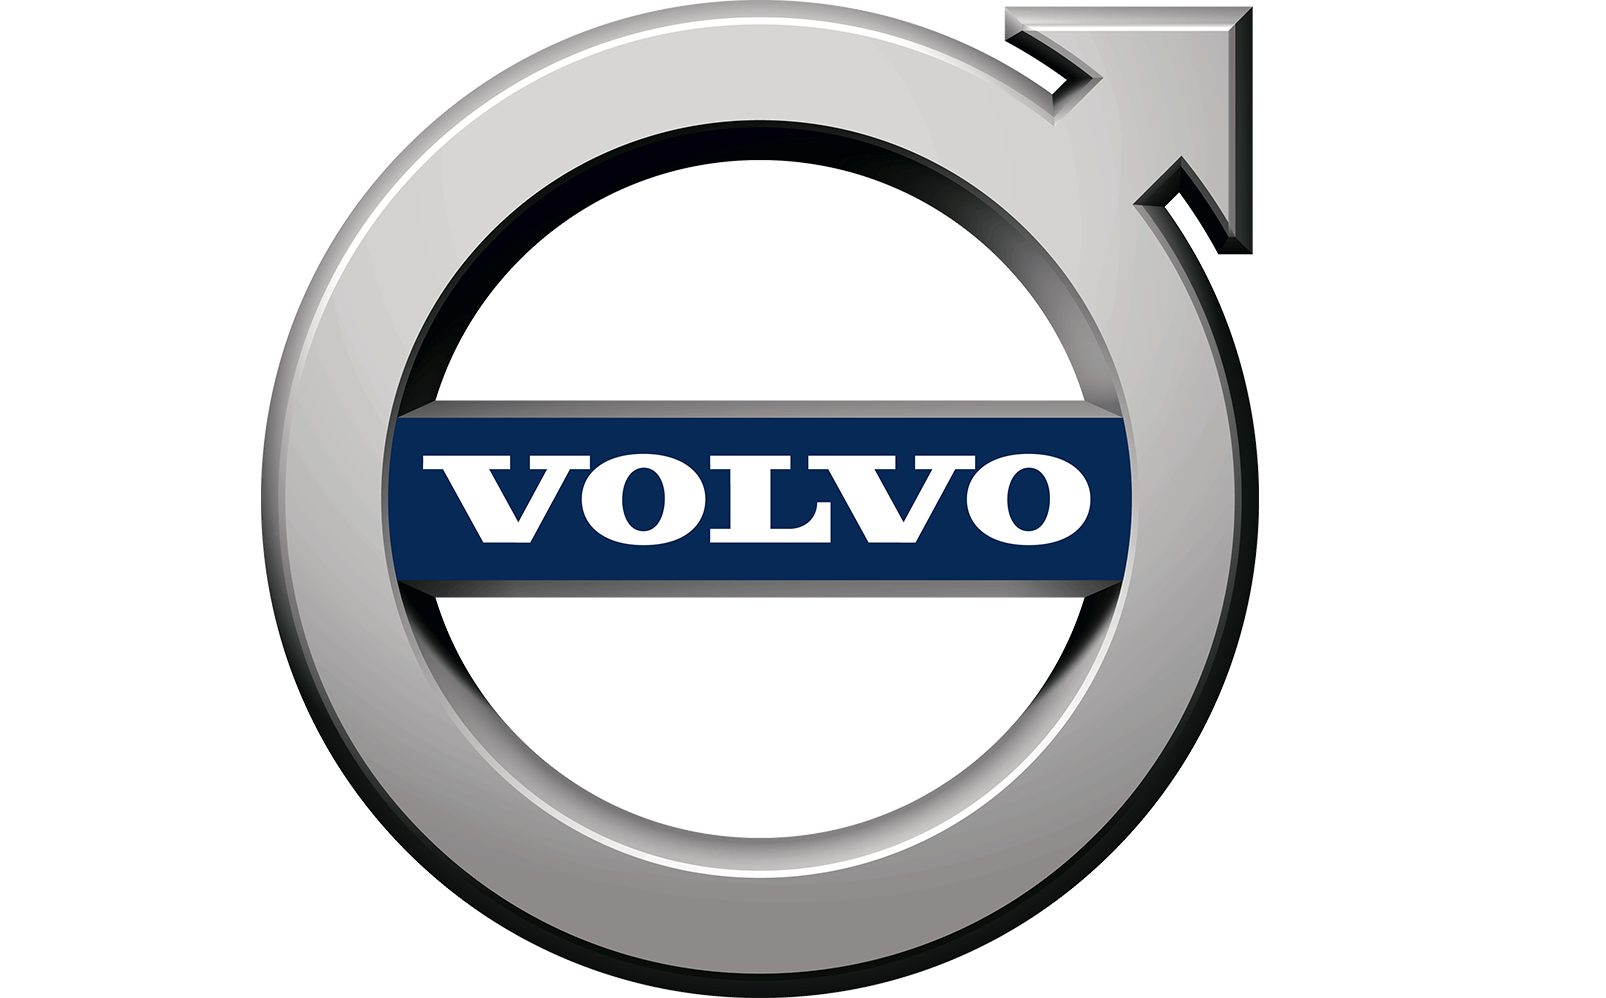 How To Draw Volvo Logo Step by Step - [5 Easy Phase]